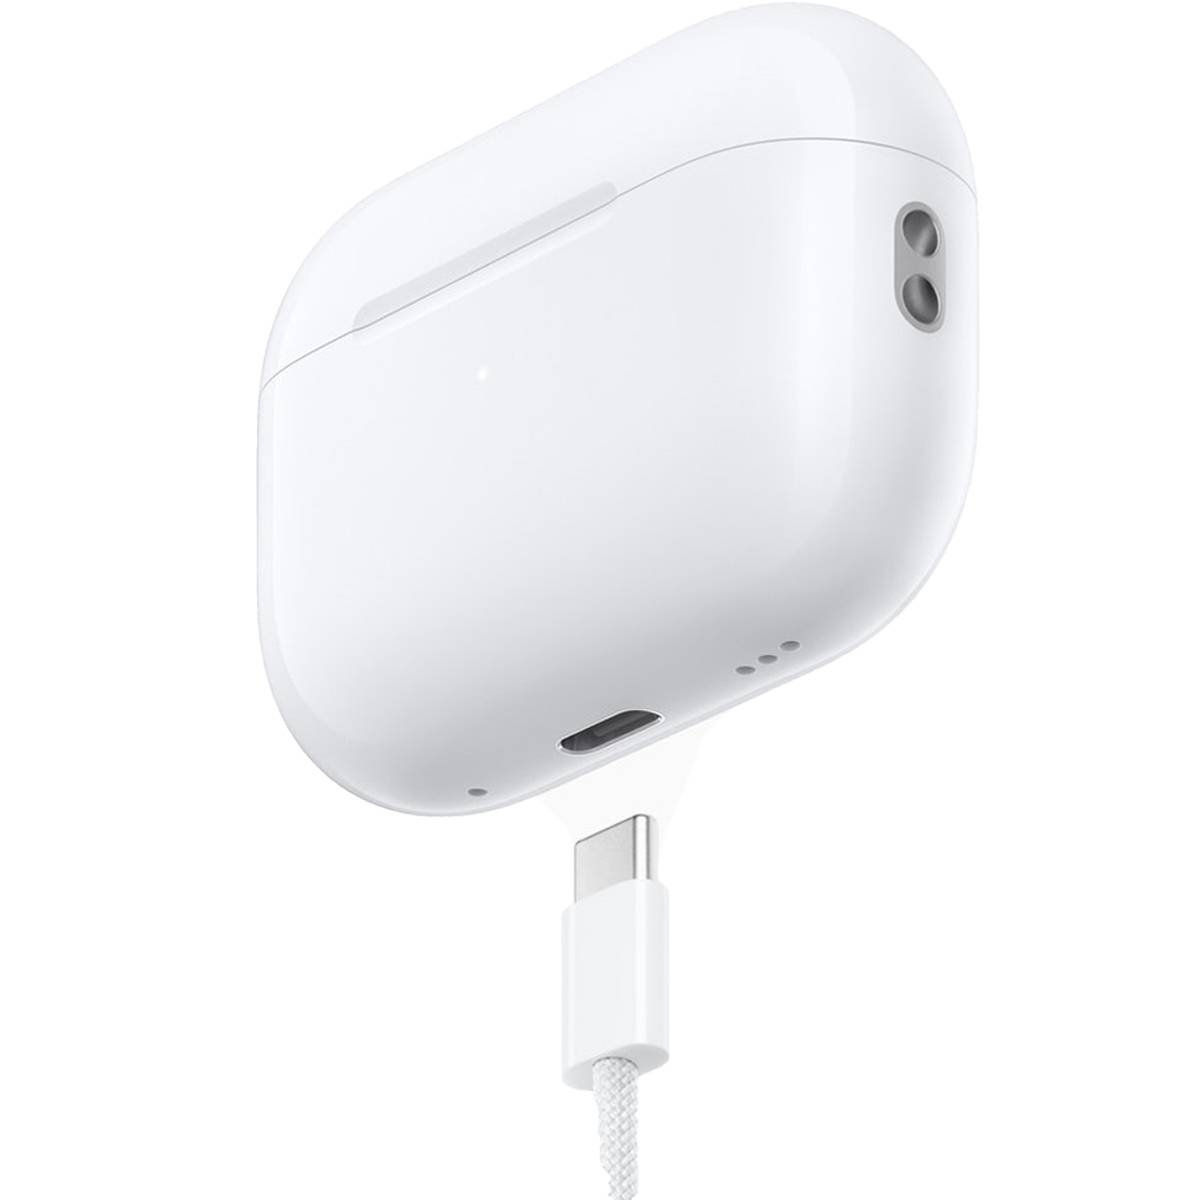 Apple AirPods Pro 2 (USB-C) – Made in Japan Quality with Lanyard